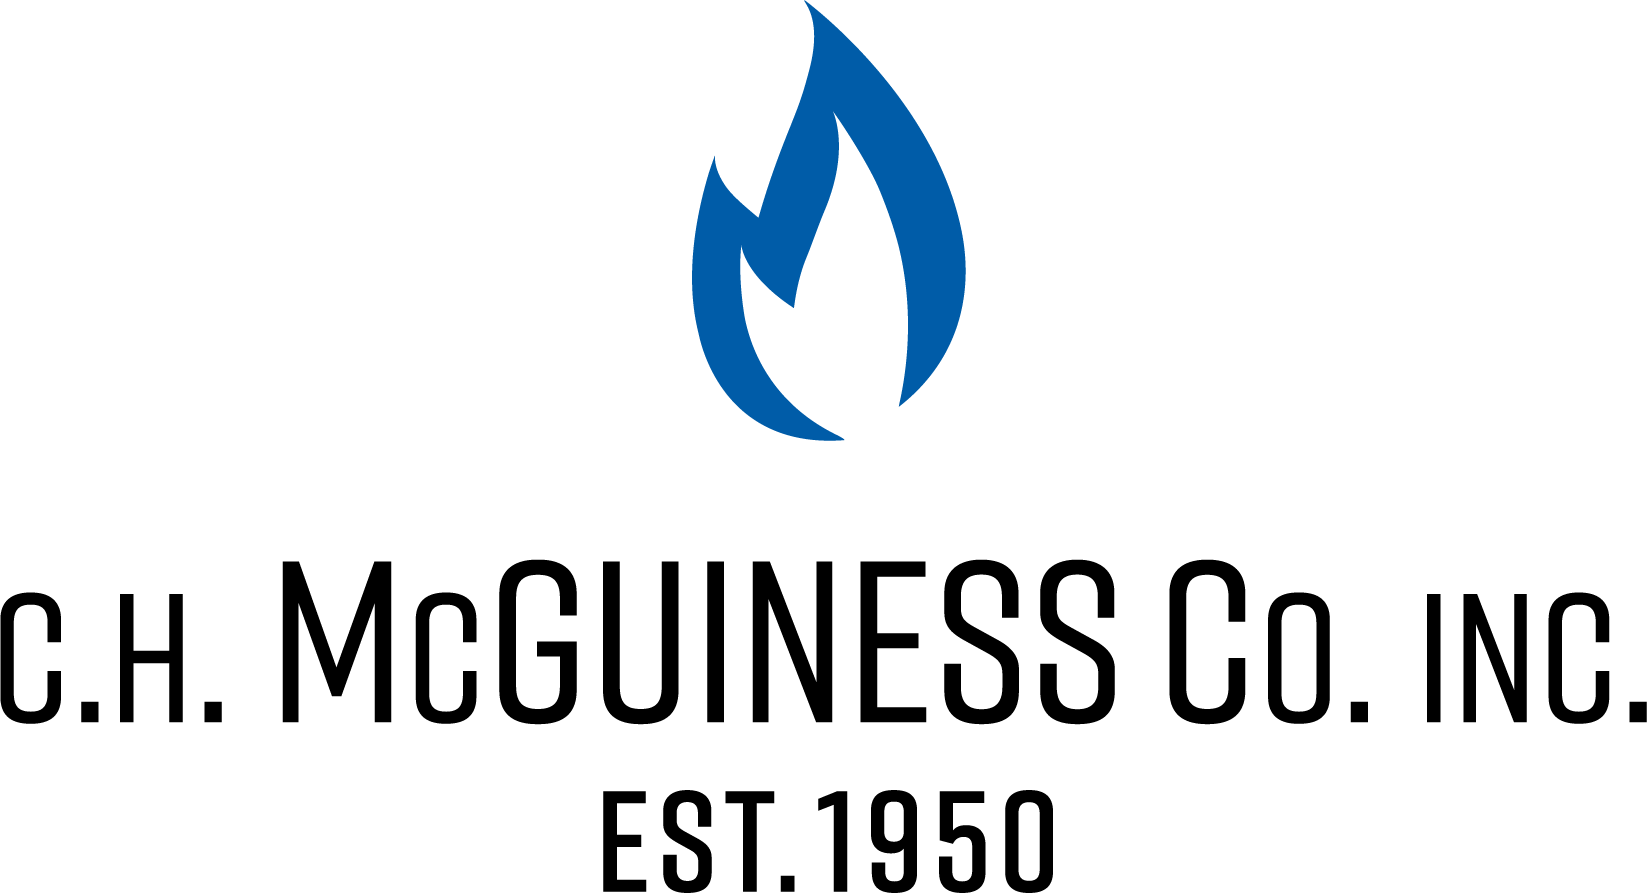 C.H. McGuiness Co. Inc.